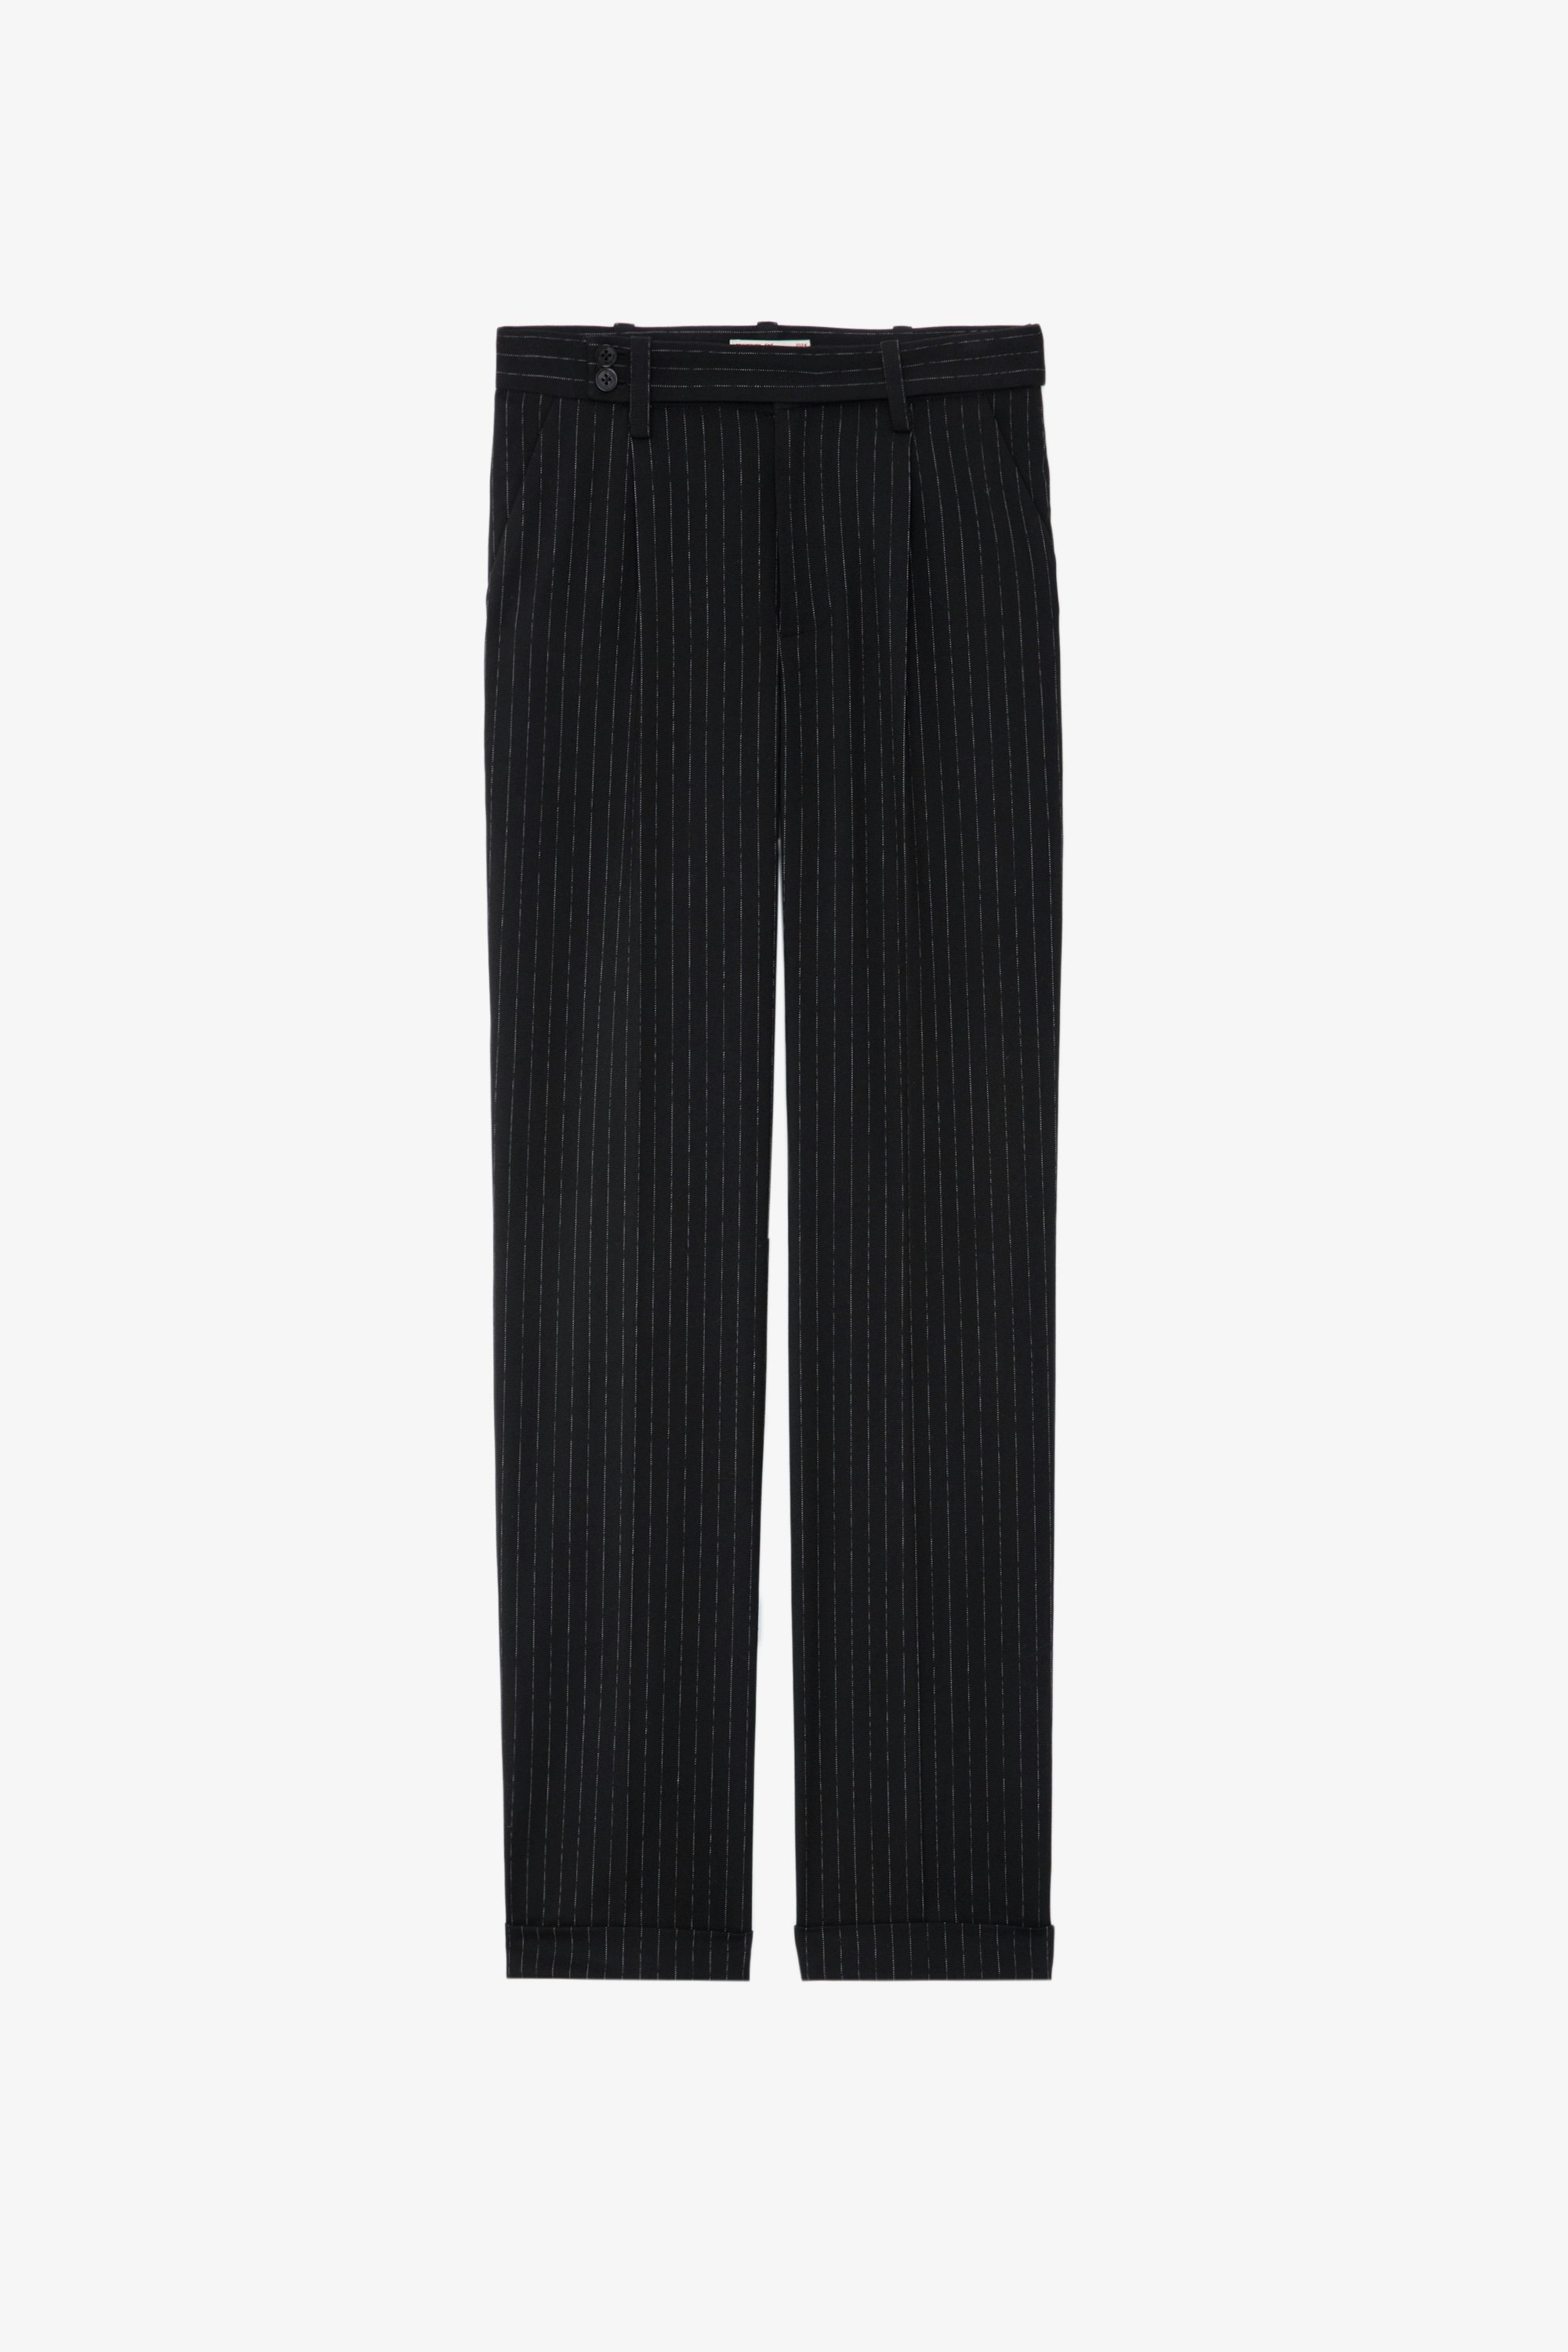 Pura Trousers - Black wide-leg tailored trousers with pinstripes and pockets.